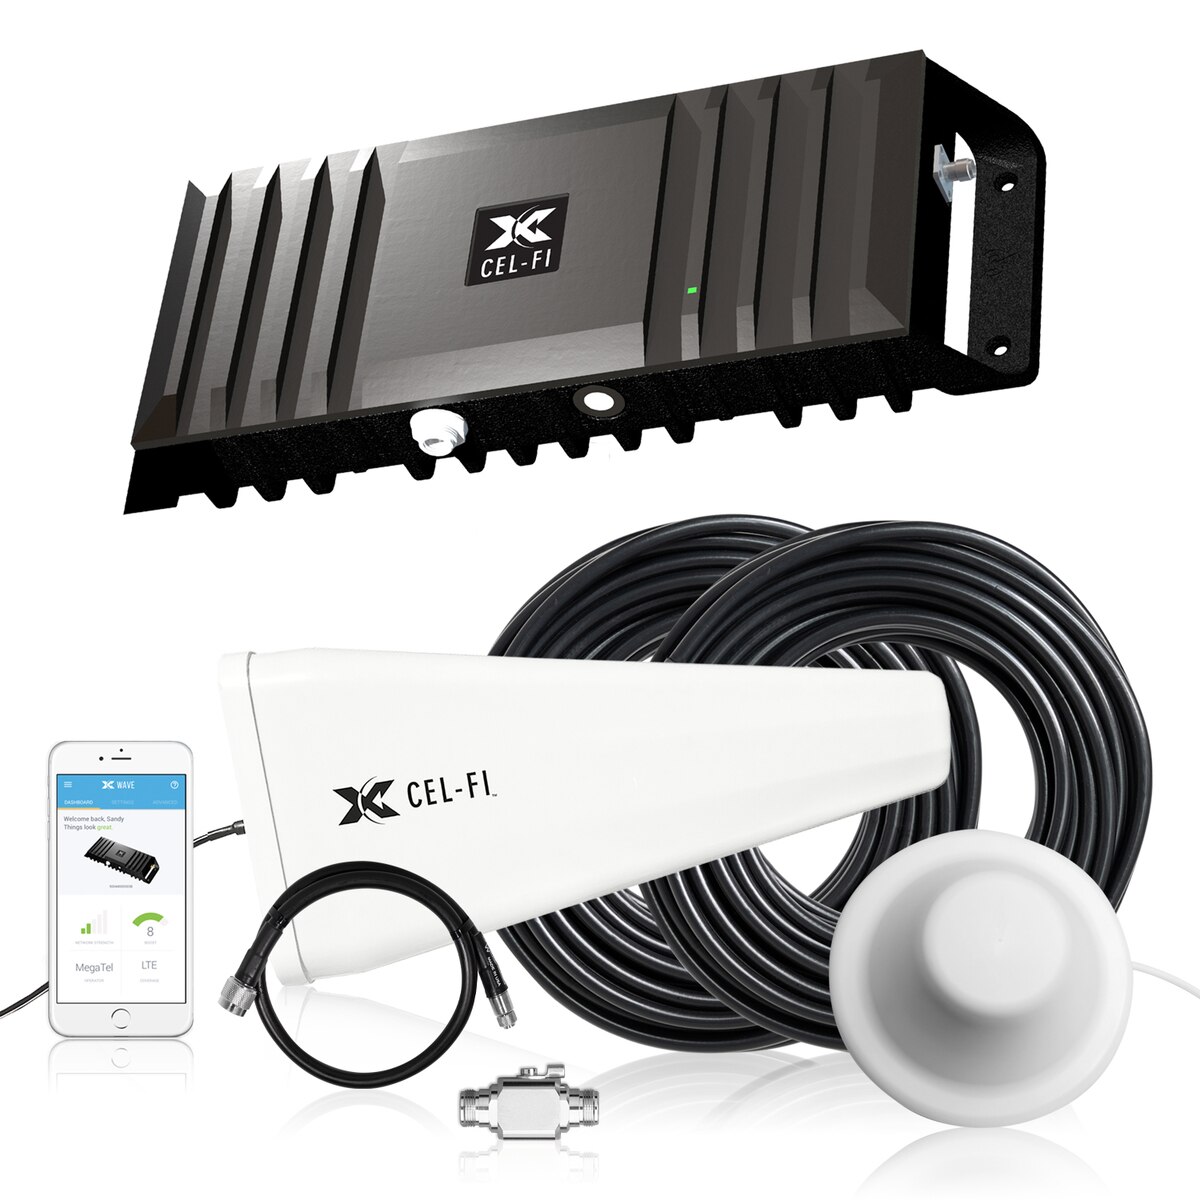 All Accessories Included Up to 100 dB Multiuser Gain Multi-Carrier Support with Carrier Switching Cel-Fi GO X Cell Phone Signal Booster| 1 Dome Antenna Bundle Kit 